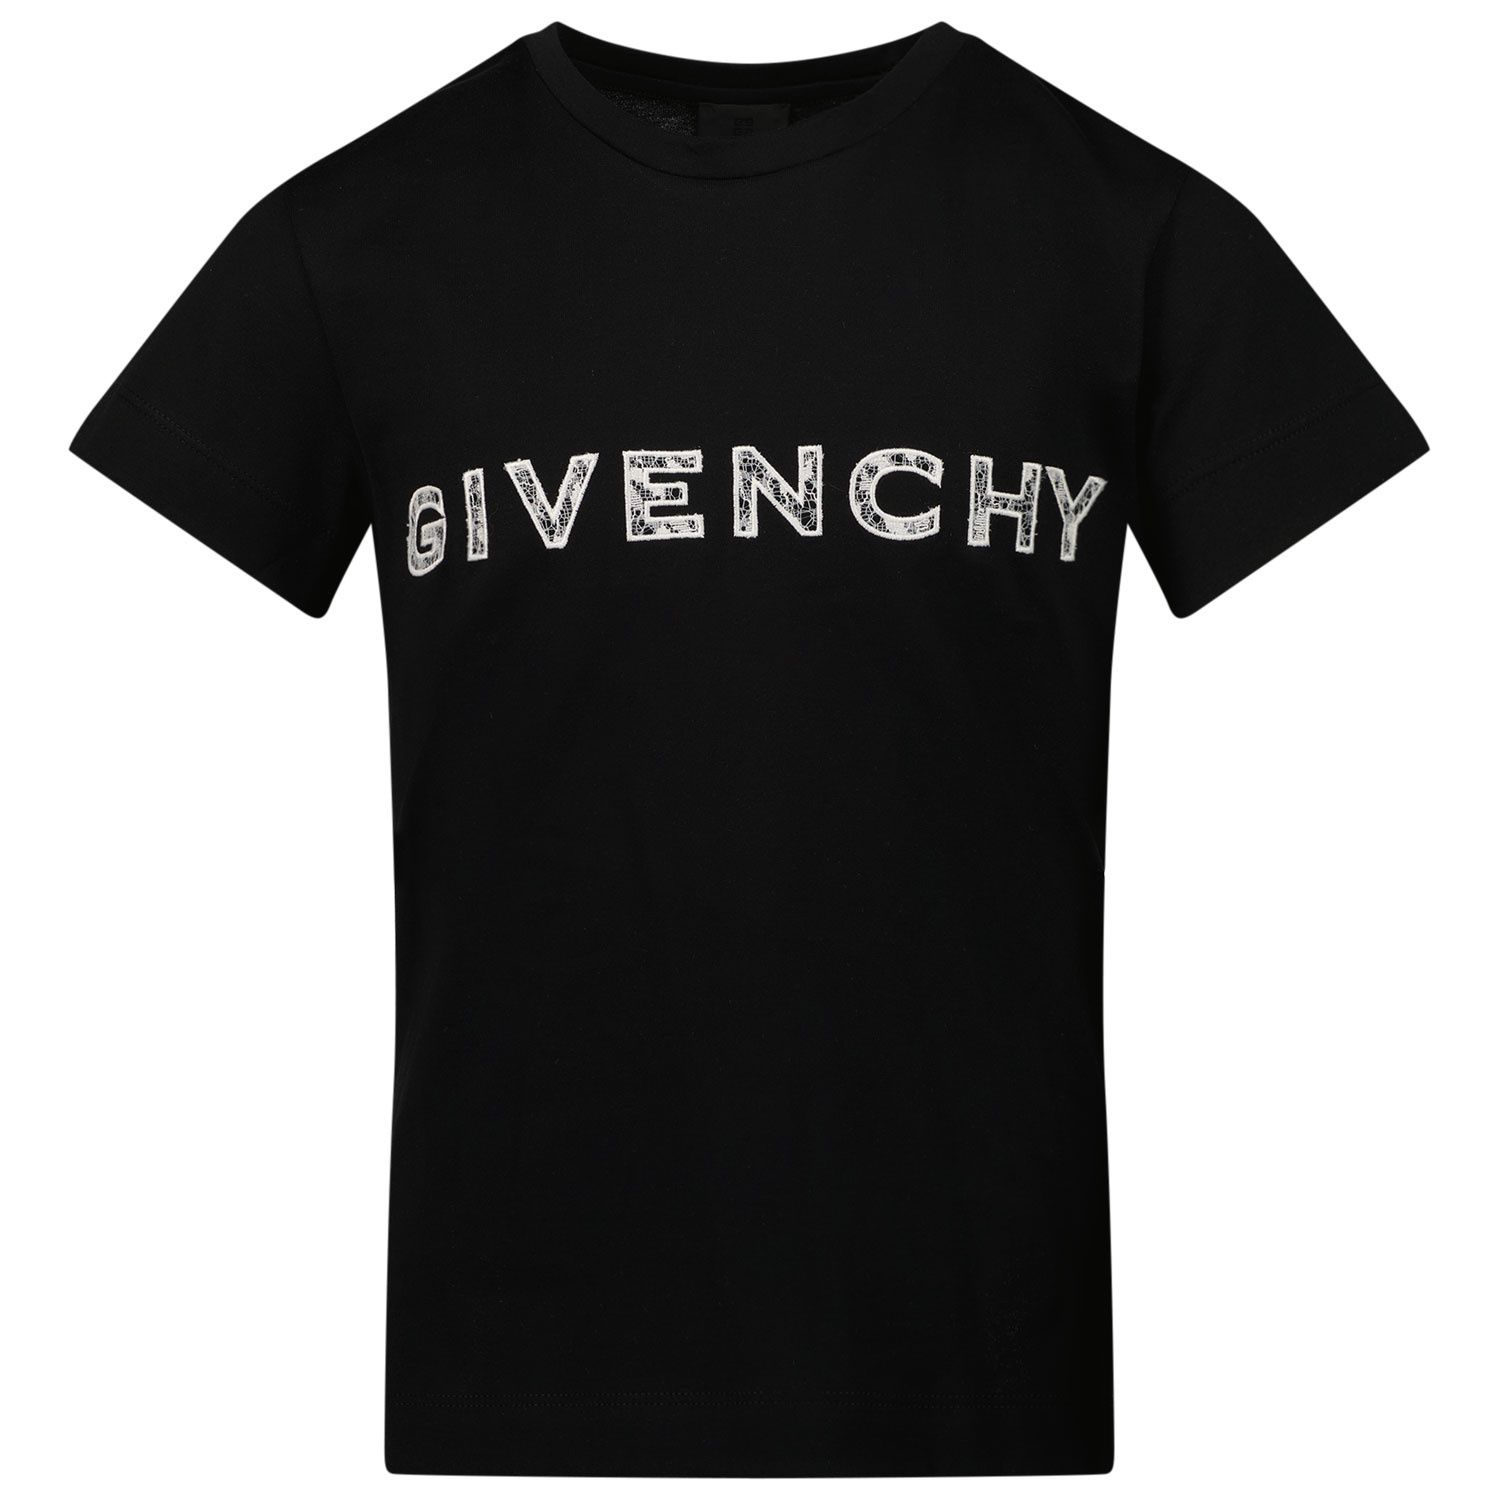 Picture of Givenchy H15246 kids t-shirt black